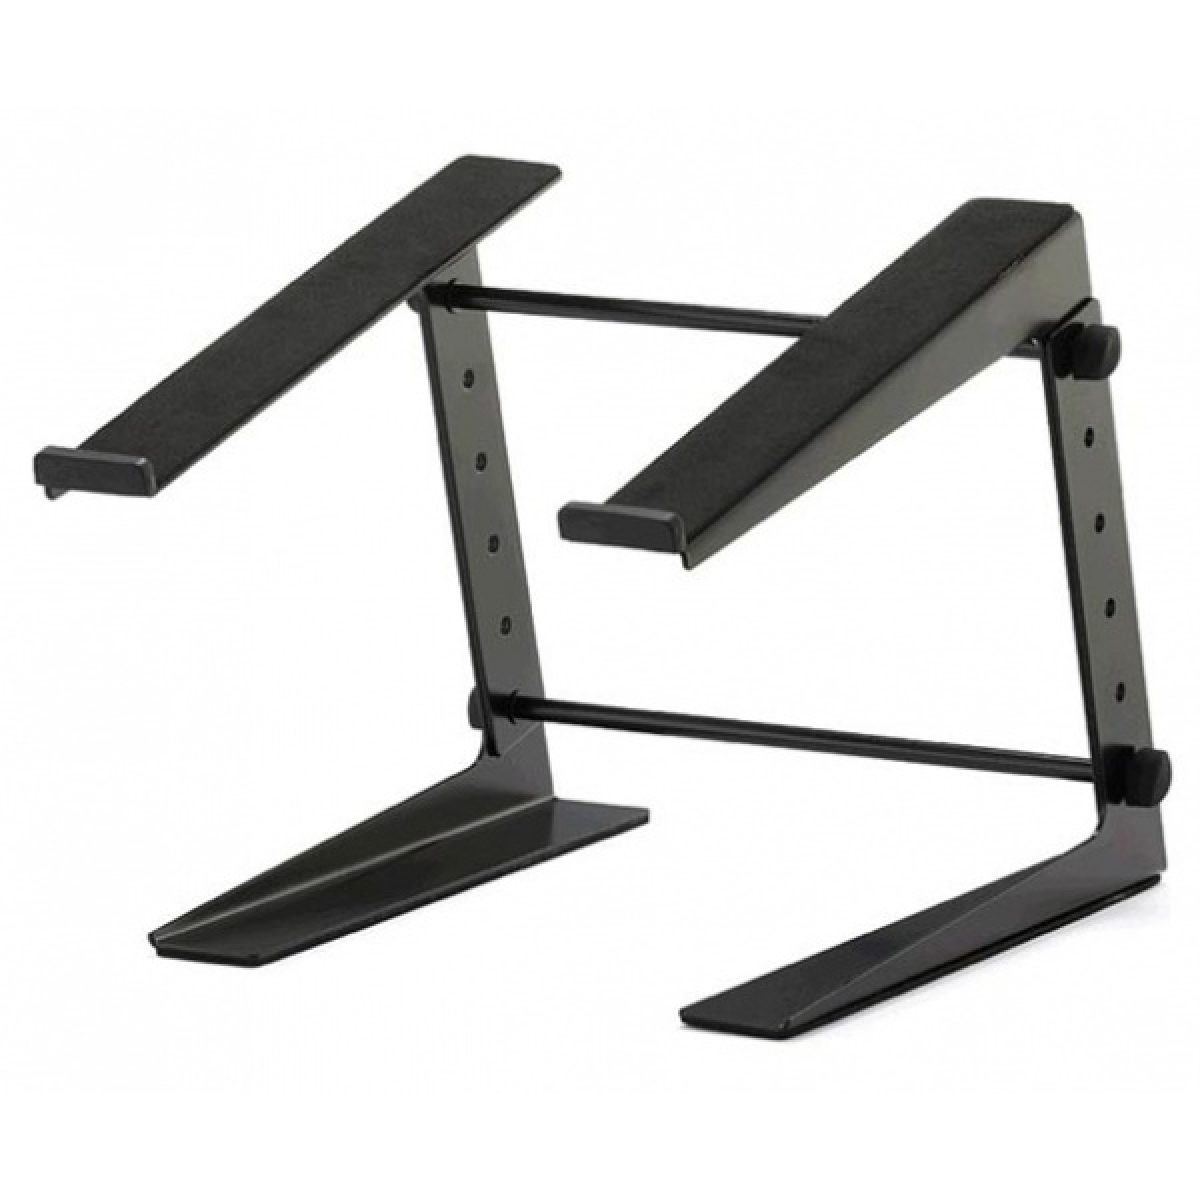 Tempo lts5 Laptop Stand